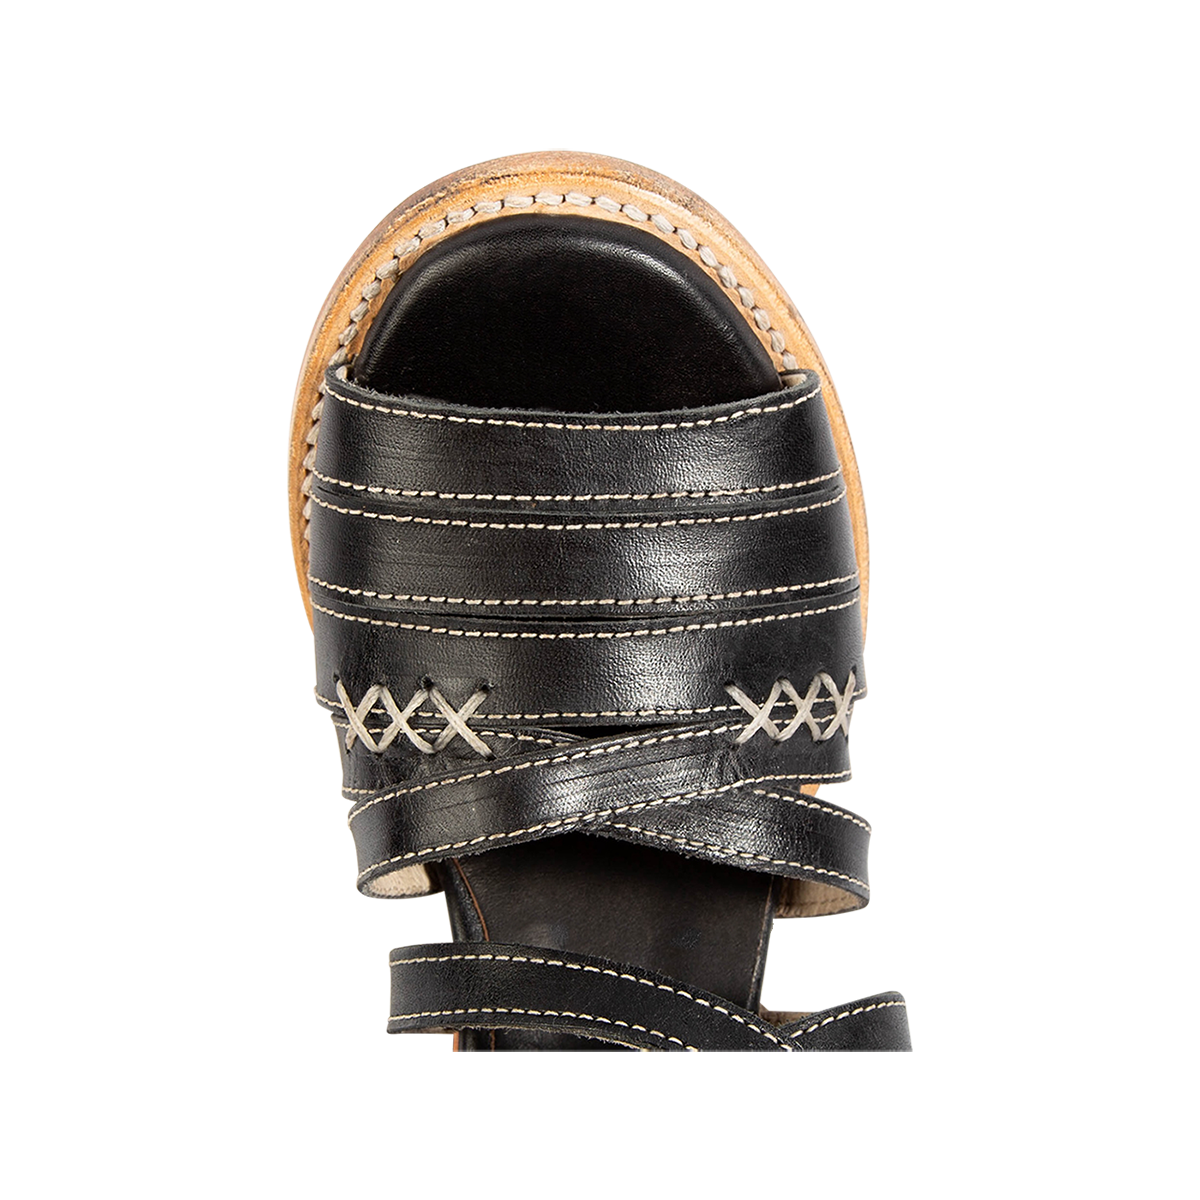 Top view showing a rounded toe and leather straps on FREEBIRD women's Makayla black leather sandal